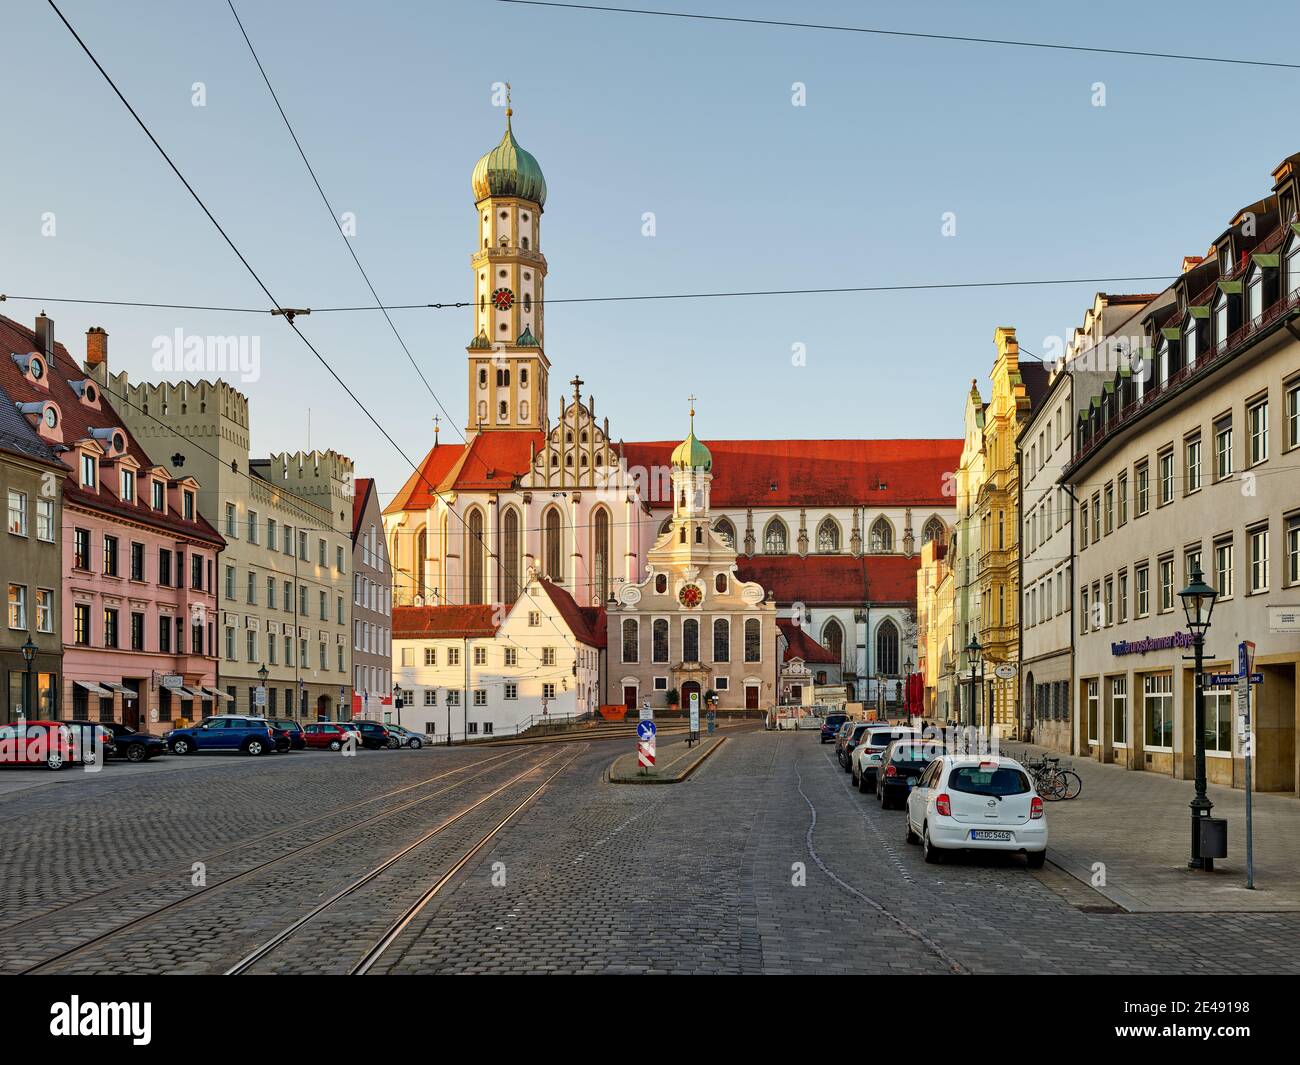 Basilica, Catholic church, Protestant church, street, square, cobblestone, bus stop, houses, old town, monument, place of interest, historic building, listed, winter, dawn Stock Photo